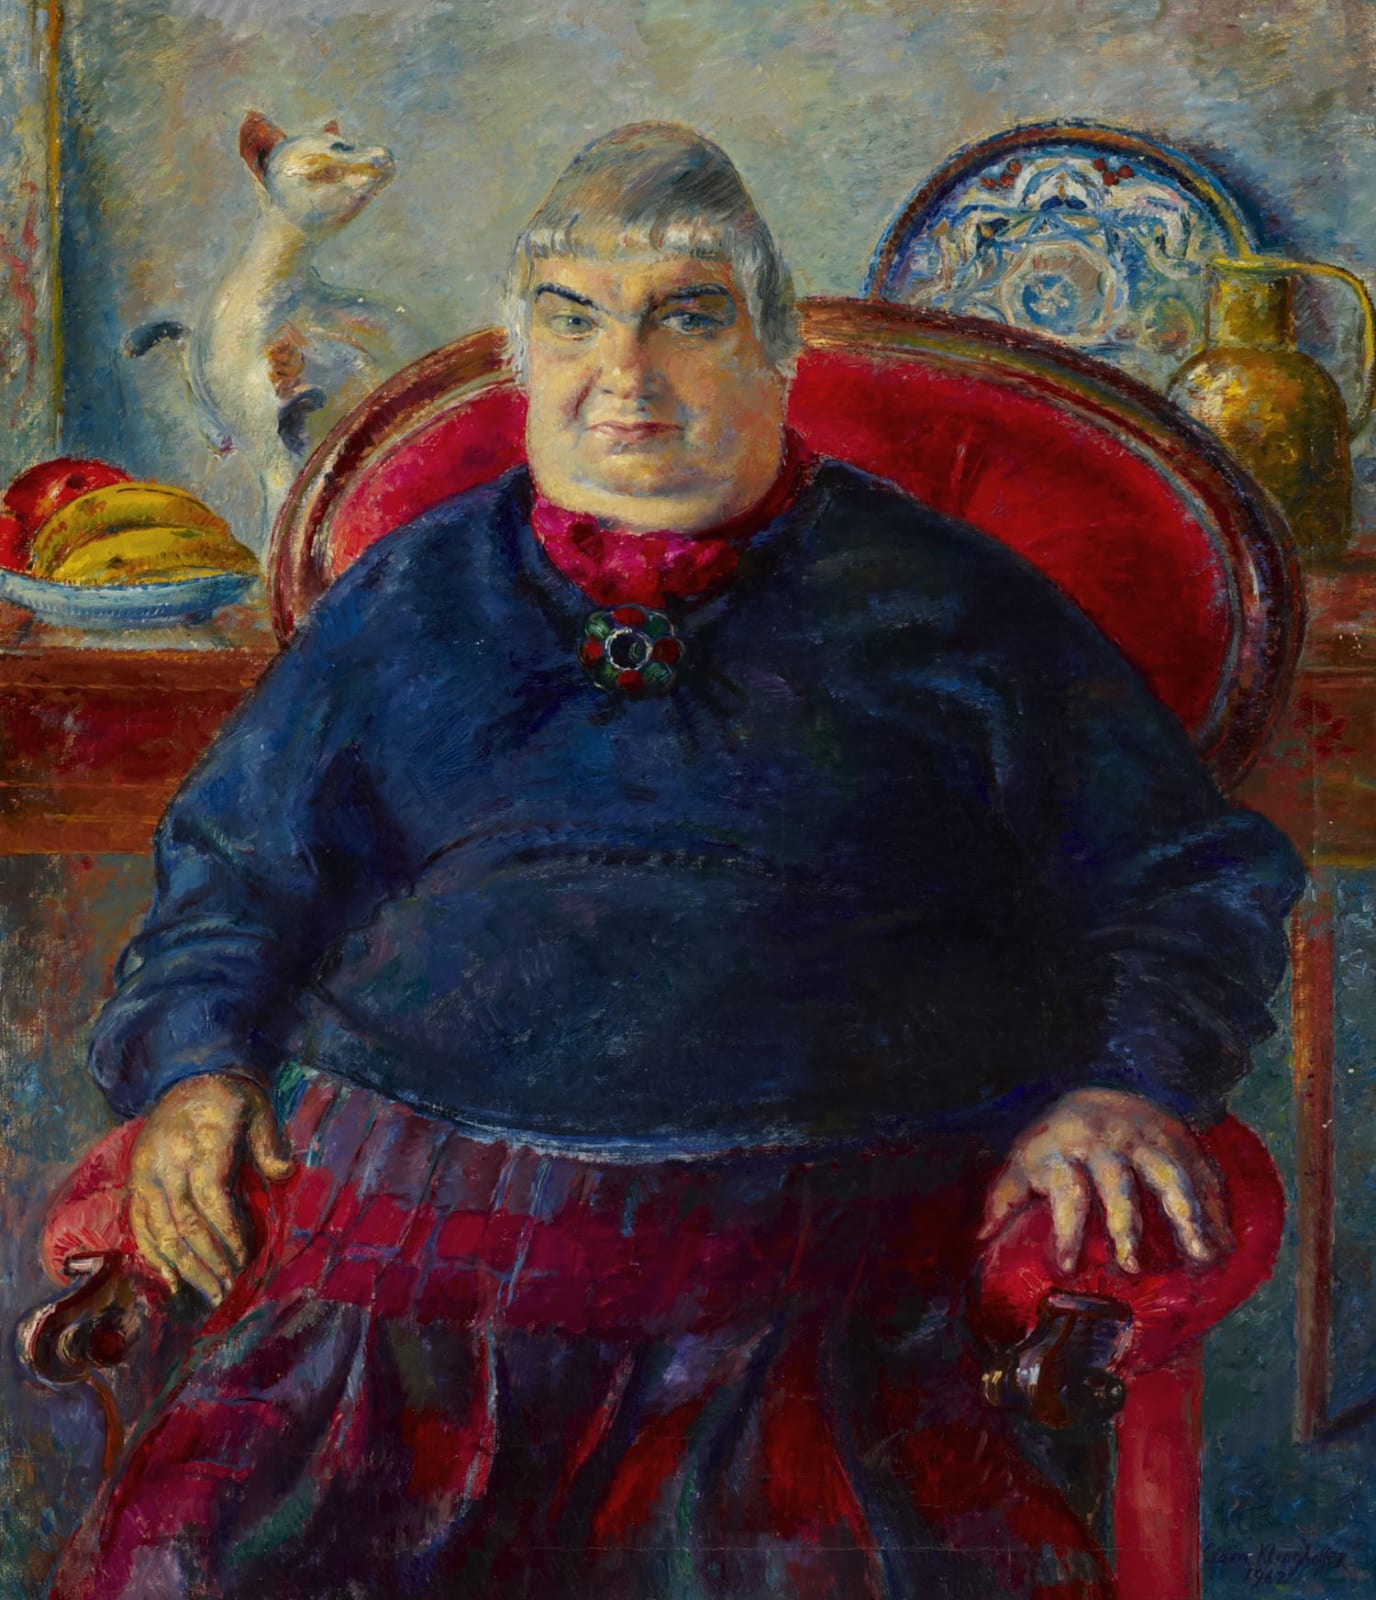 Clara Klinghoffer (1900-1970) Portrait of Orovida Pissarro 1962 Oil on canvas 102.2 x 86.8 cm Ben Uri Collection © Clara Klinghoffer estate To see and discover more about this artist click here